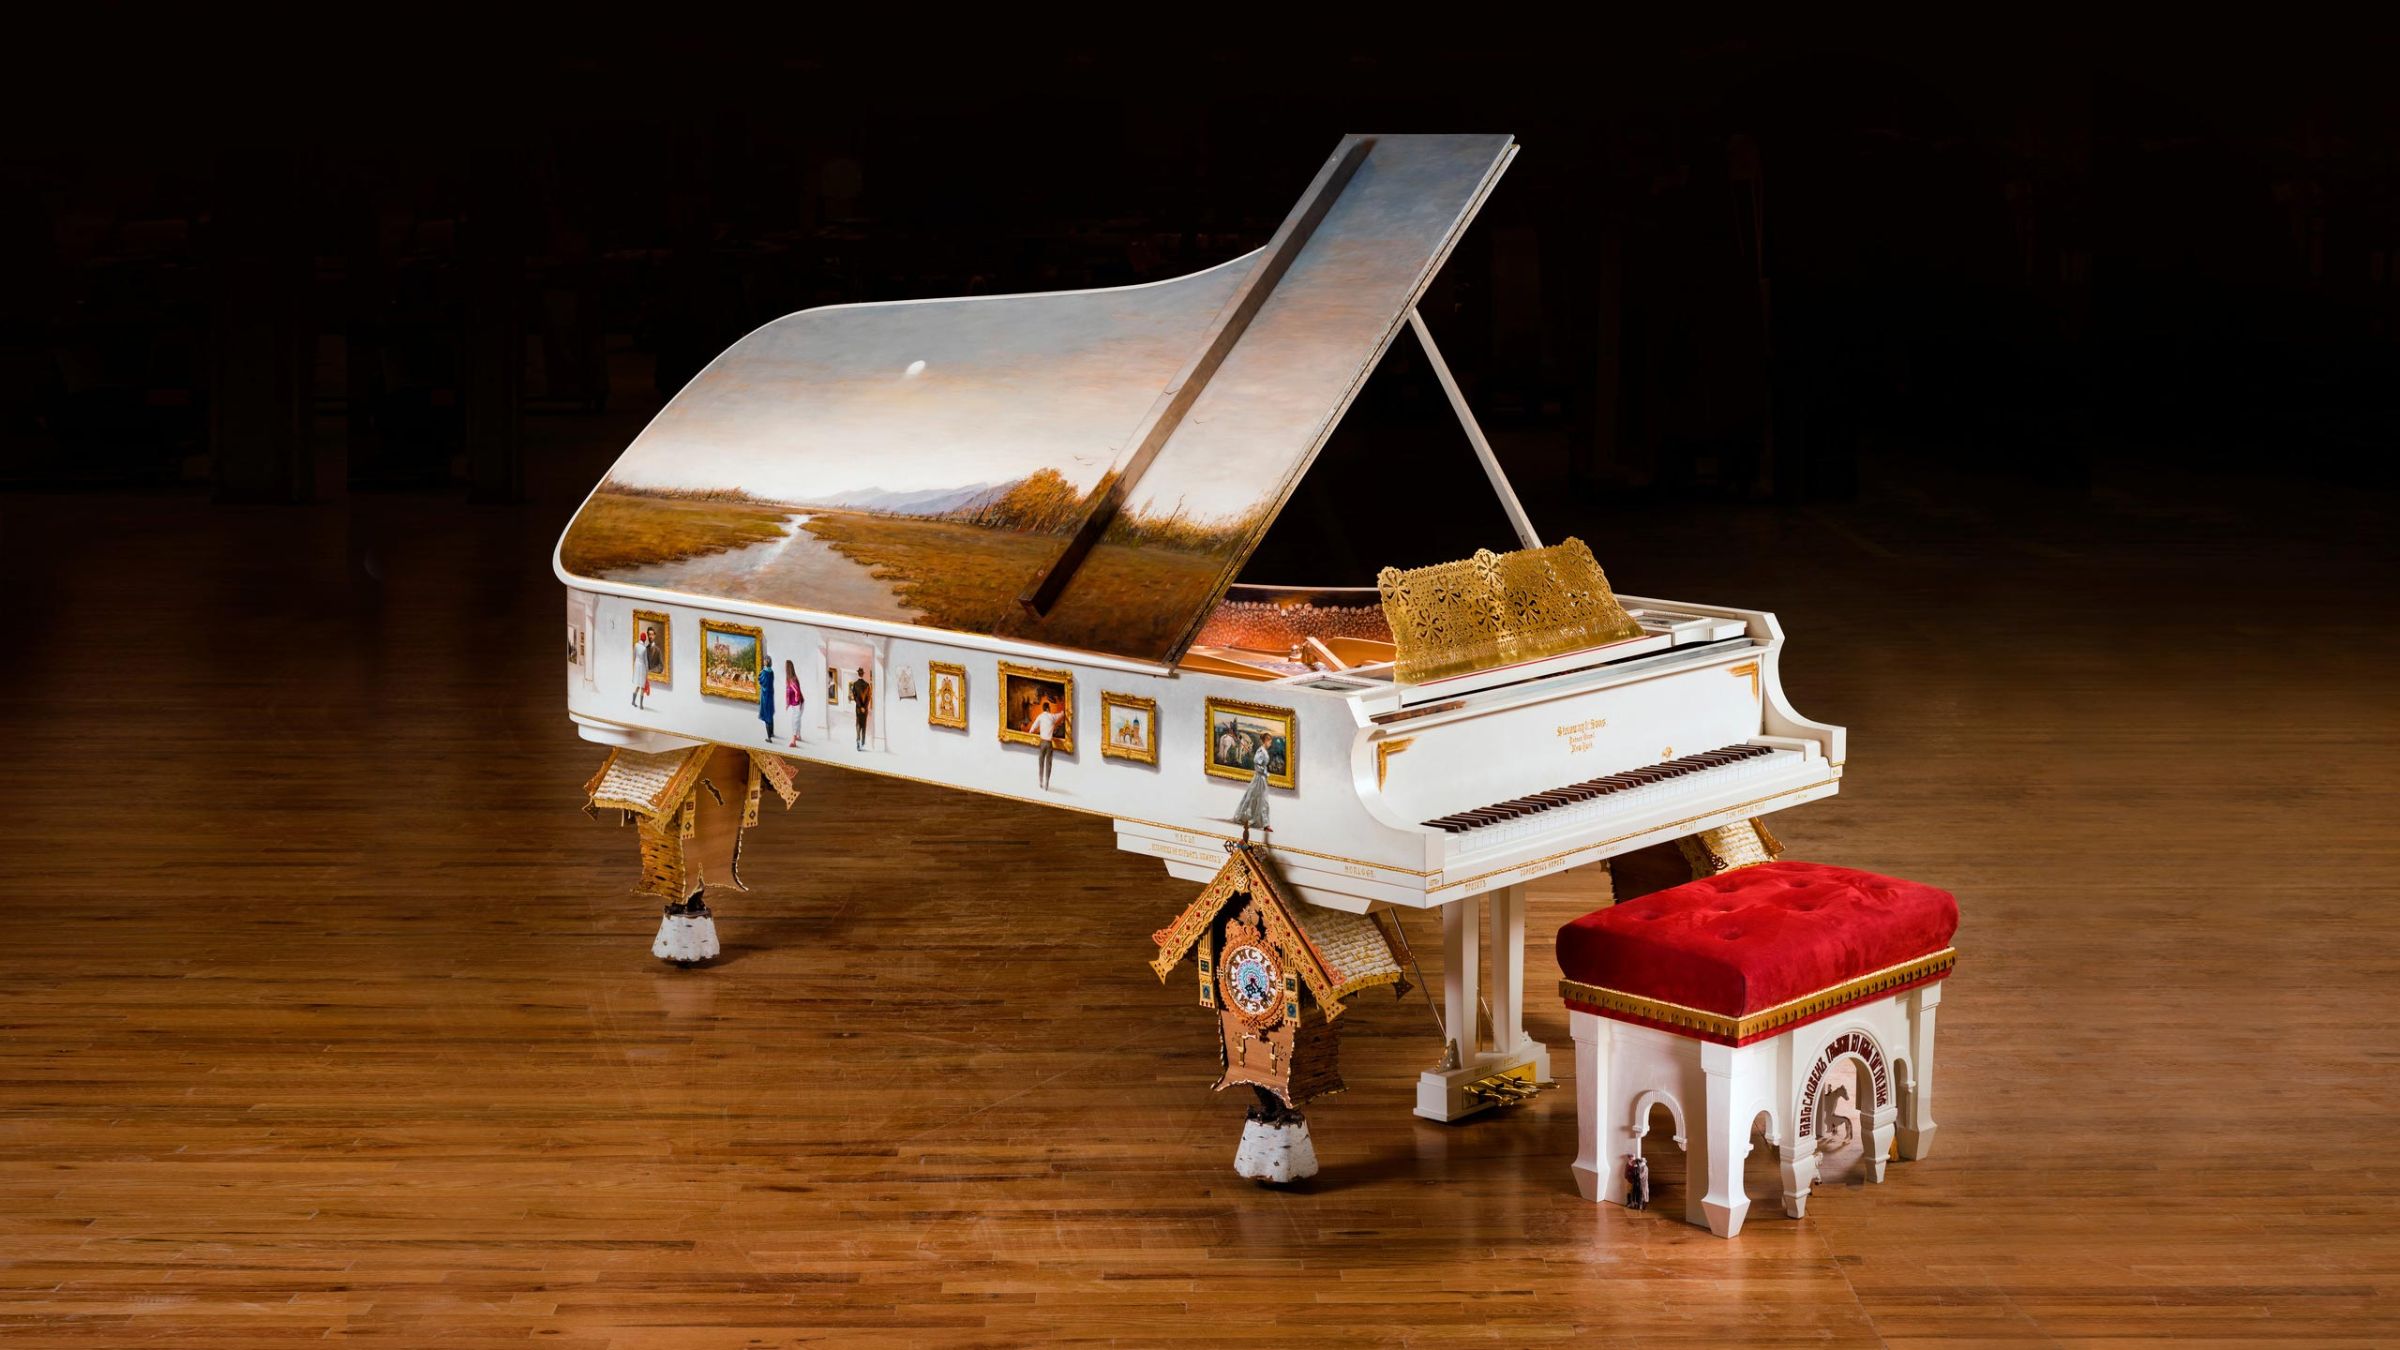 The Steinway & Sons “Pictures at an Exhibition” piano